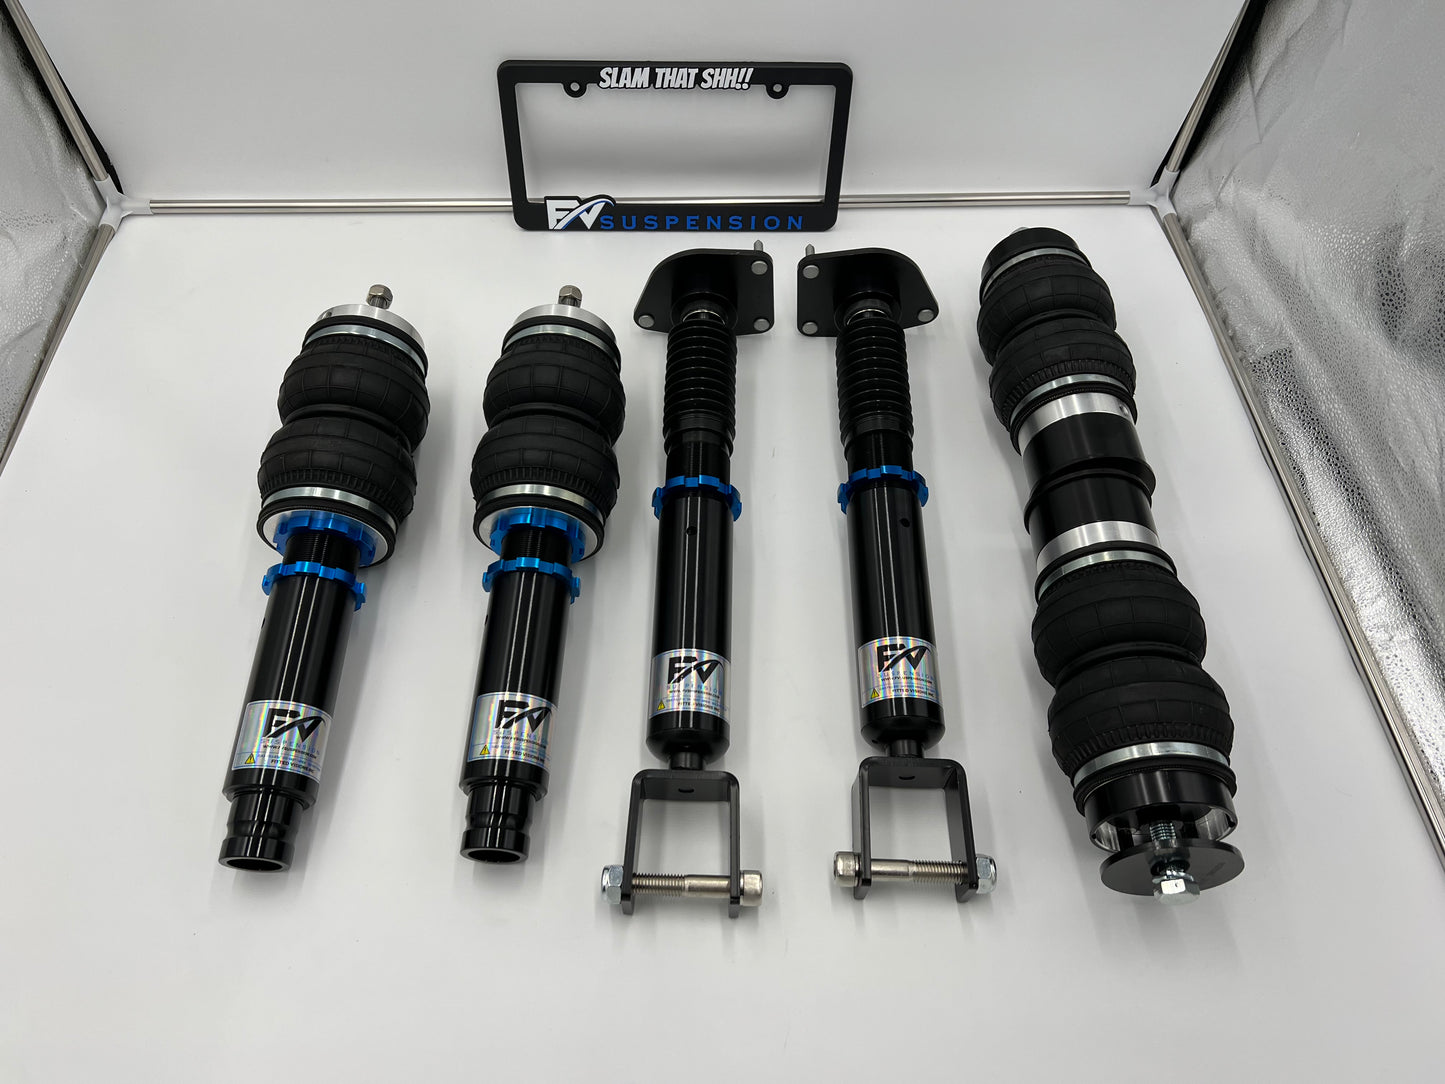 FV Suspension 3P Tier 2 Complete Air Ride kit for 08-13 Cadillac CTS AWD - FVALtier2kit156